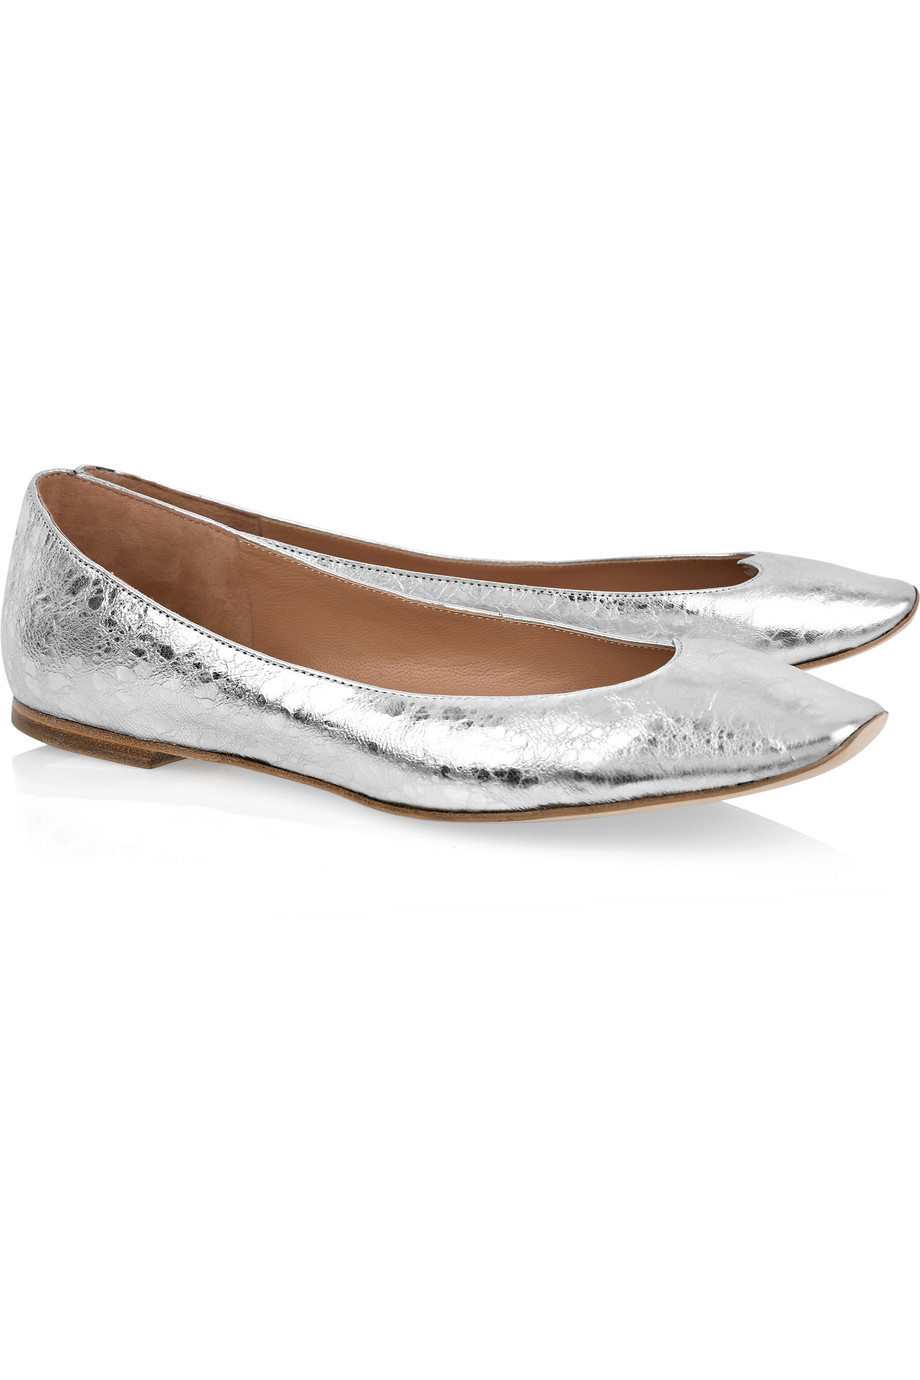 See By Chloé Crinkled-leather Scalloped Ballerina Flats in Silver ...